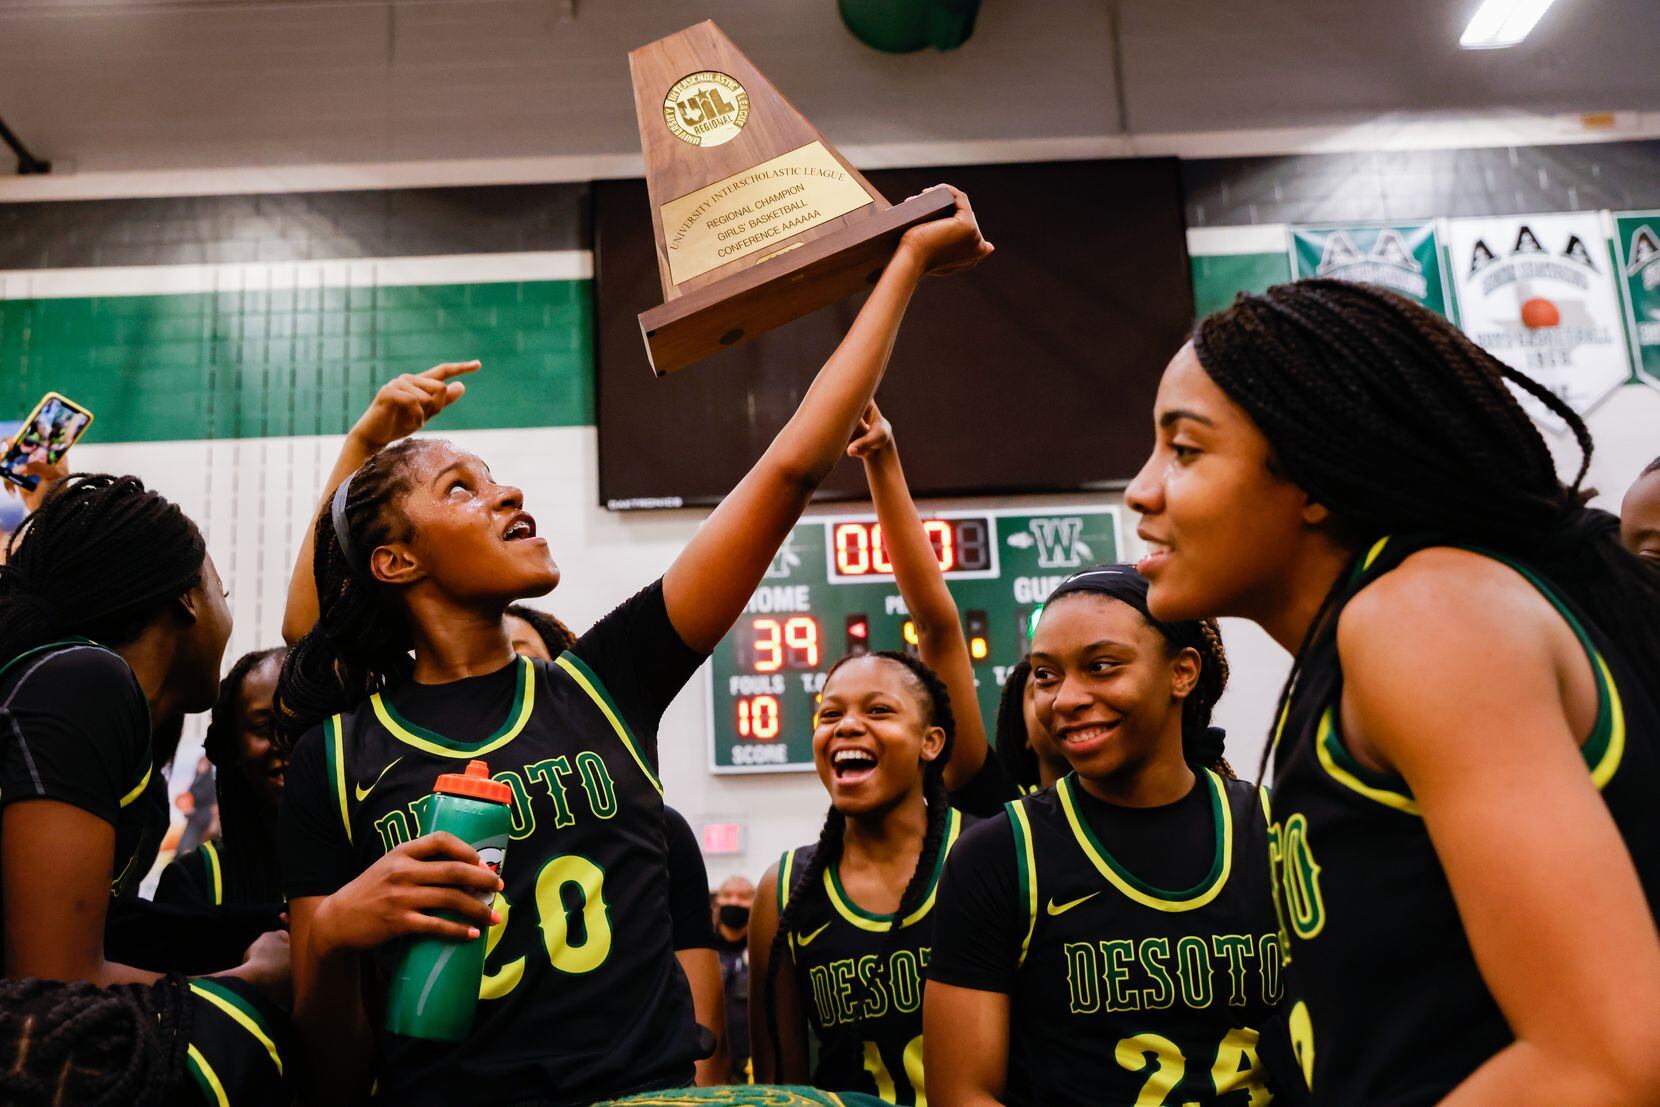 DeSoto basketball team members celebrated their win against Duncanville after the Class 6A Region II UIL playoff game March 2 in Waxahachie. DeSoto won 52-39.